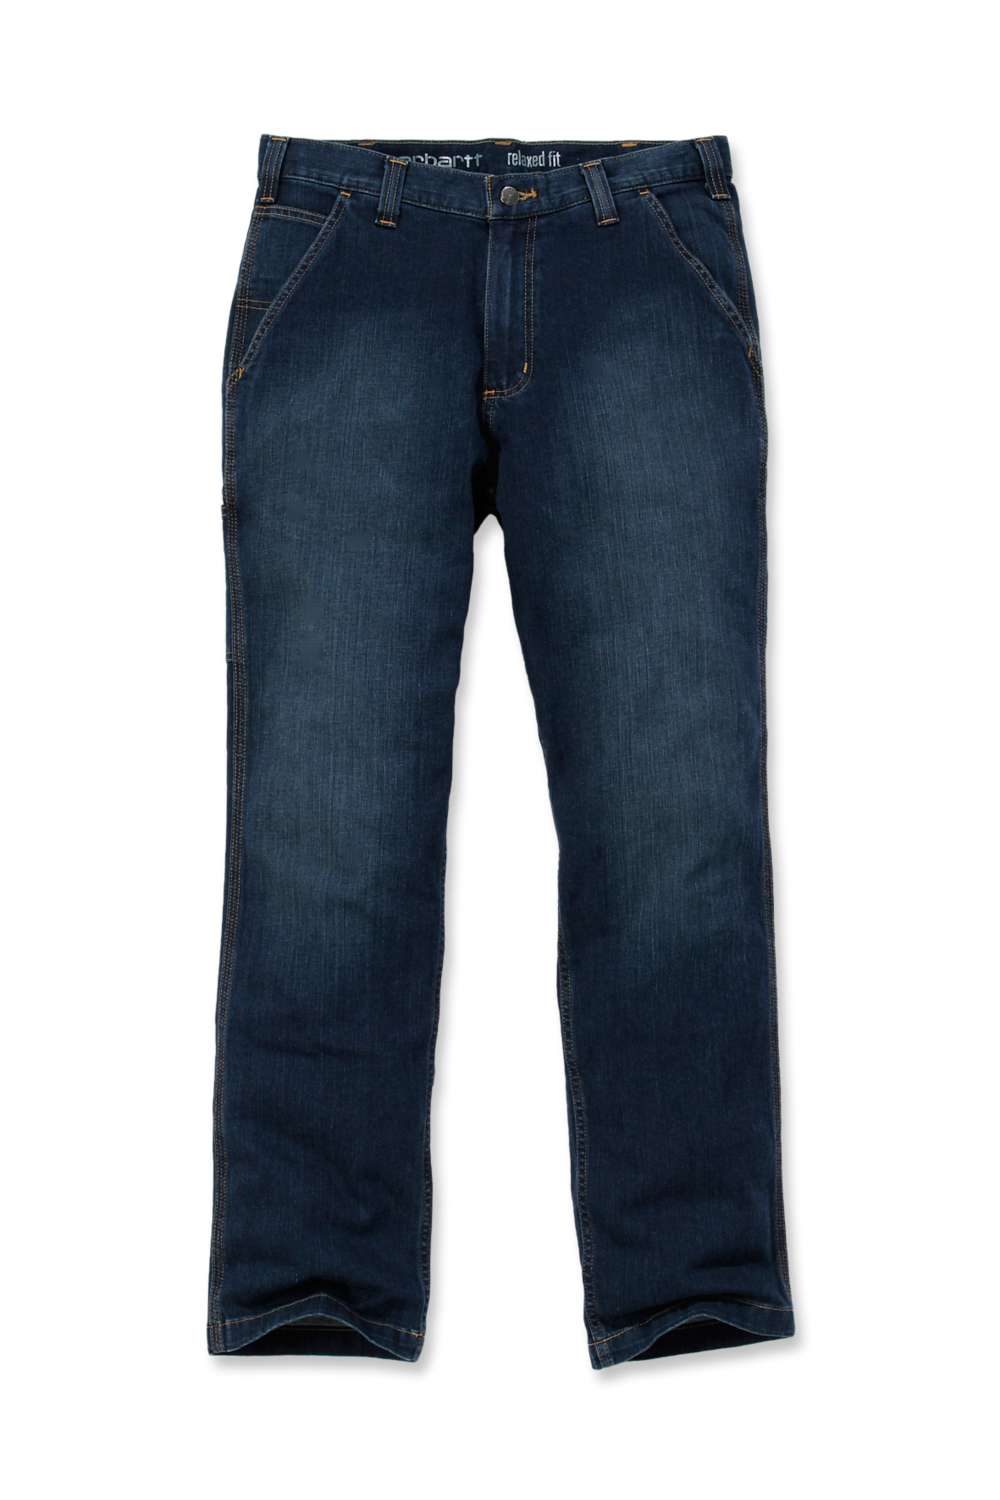 2-way stretch denim trousers for men with a straight cut